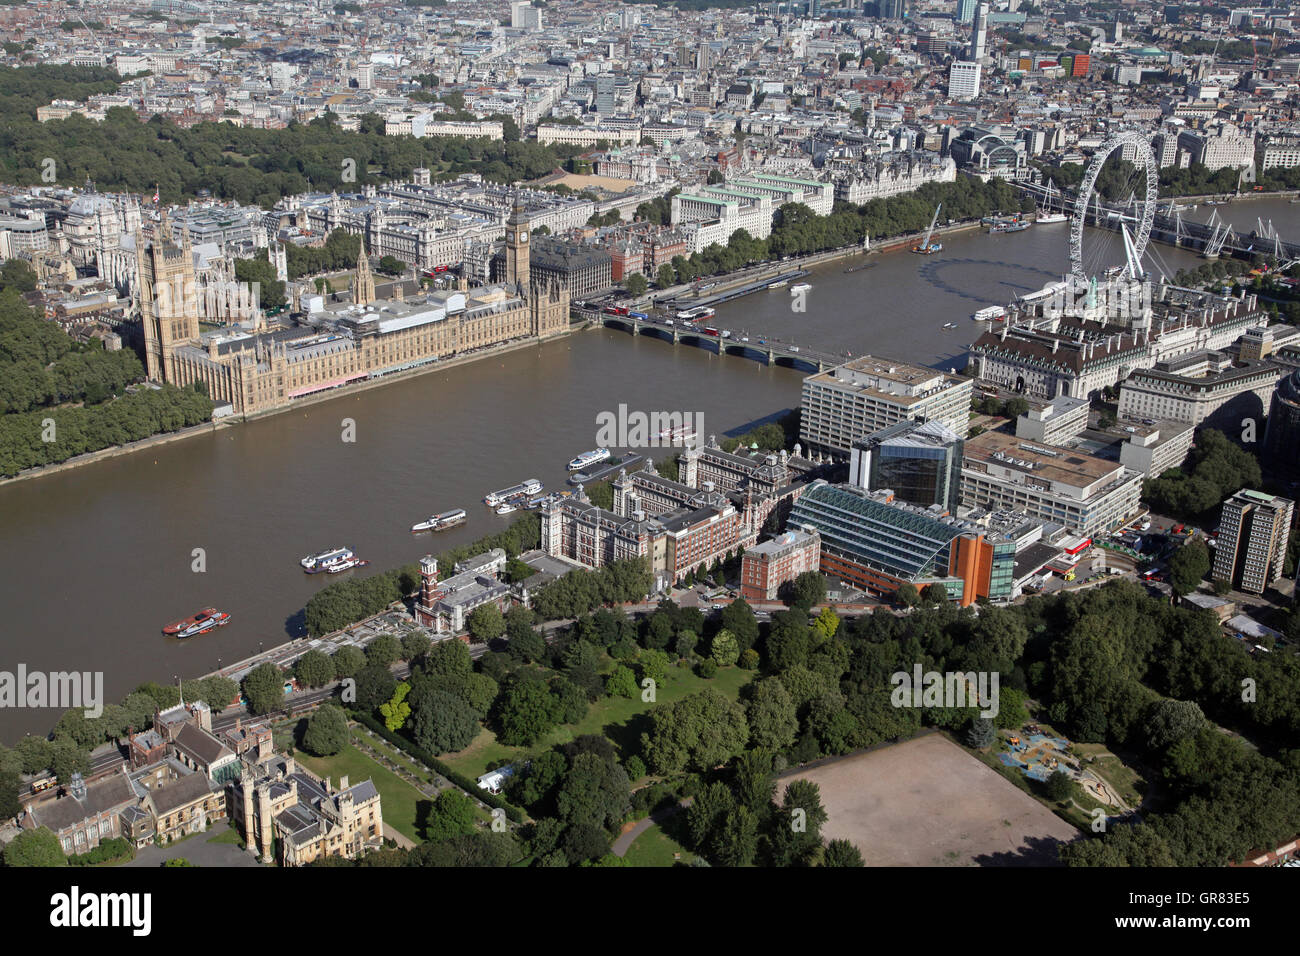 aerial view of St Thomas' Hospital in Lambeth, Houses of Parliament & Millennium Wheel, London, UK Stock Photo